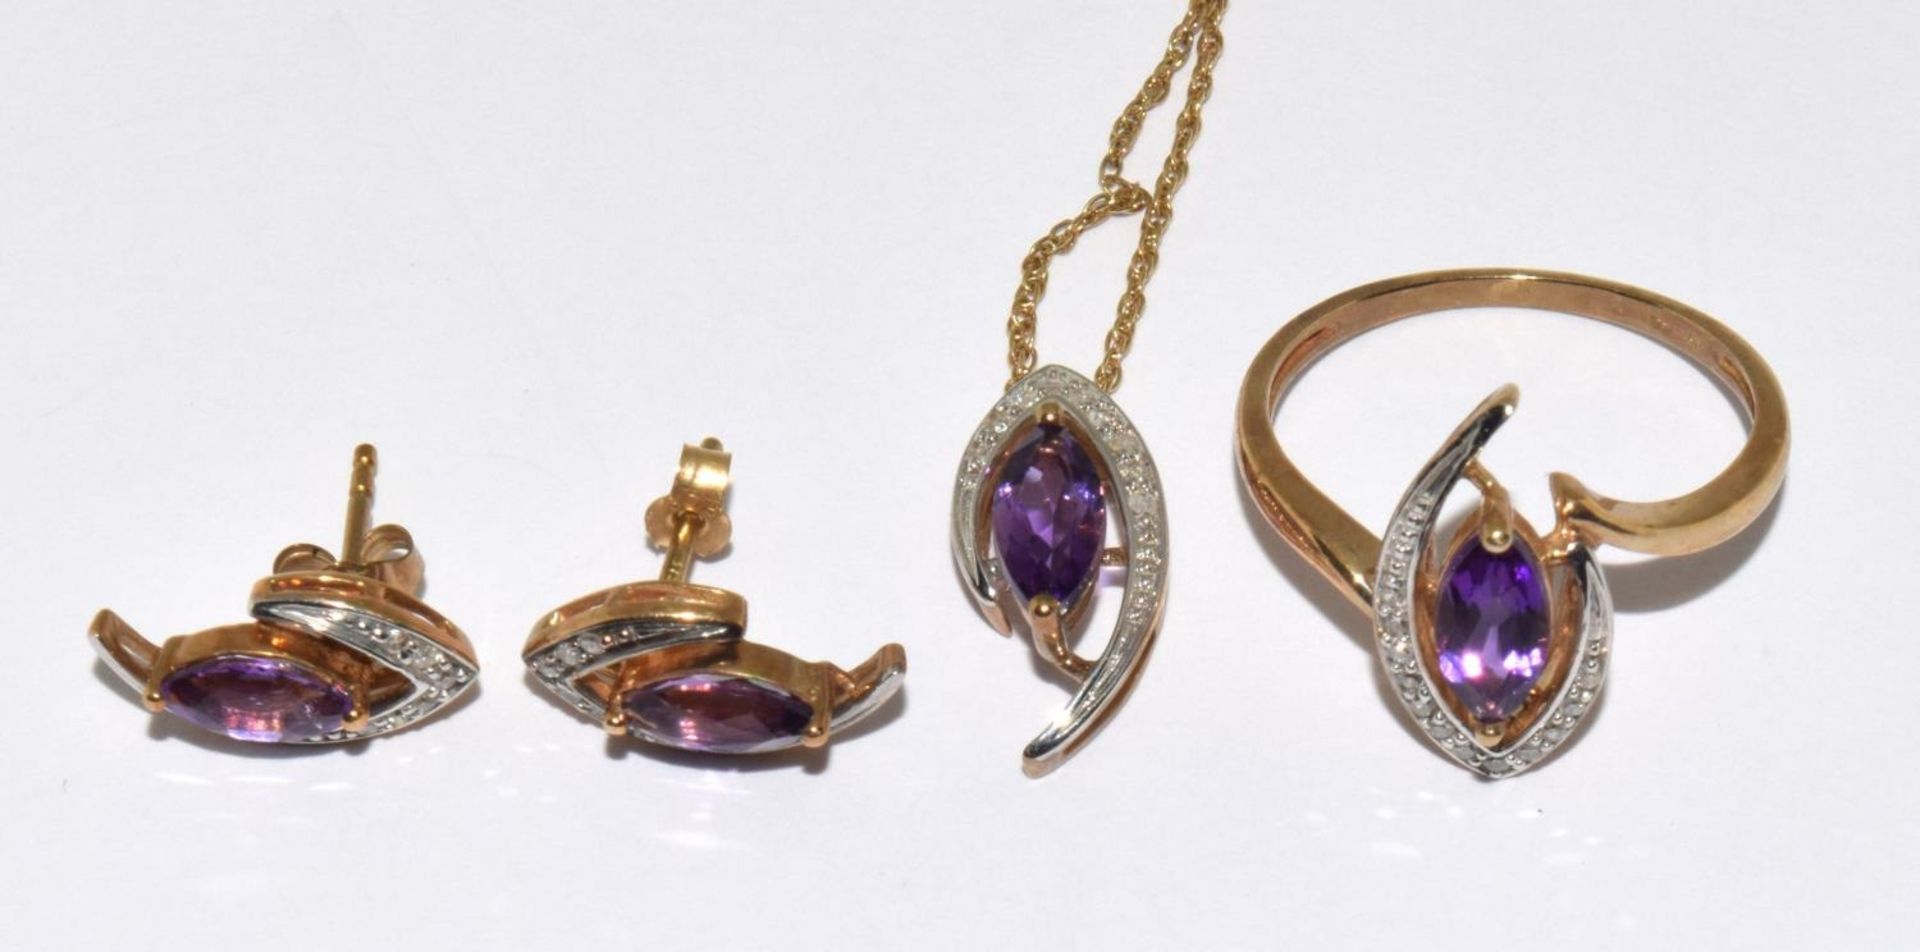 9ct Gold Diamond Marquise Cut Amethyst Earrings, Necklace & Ring Set. Size M - Image 9 of 9